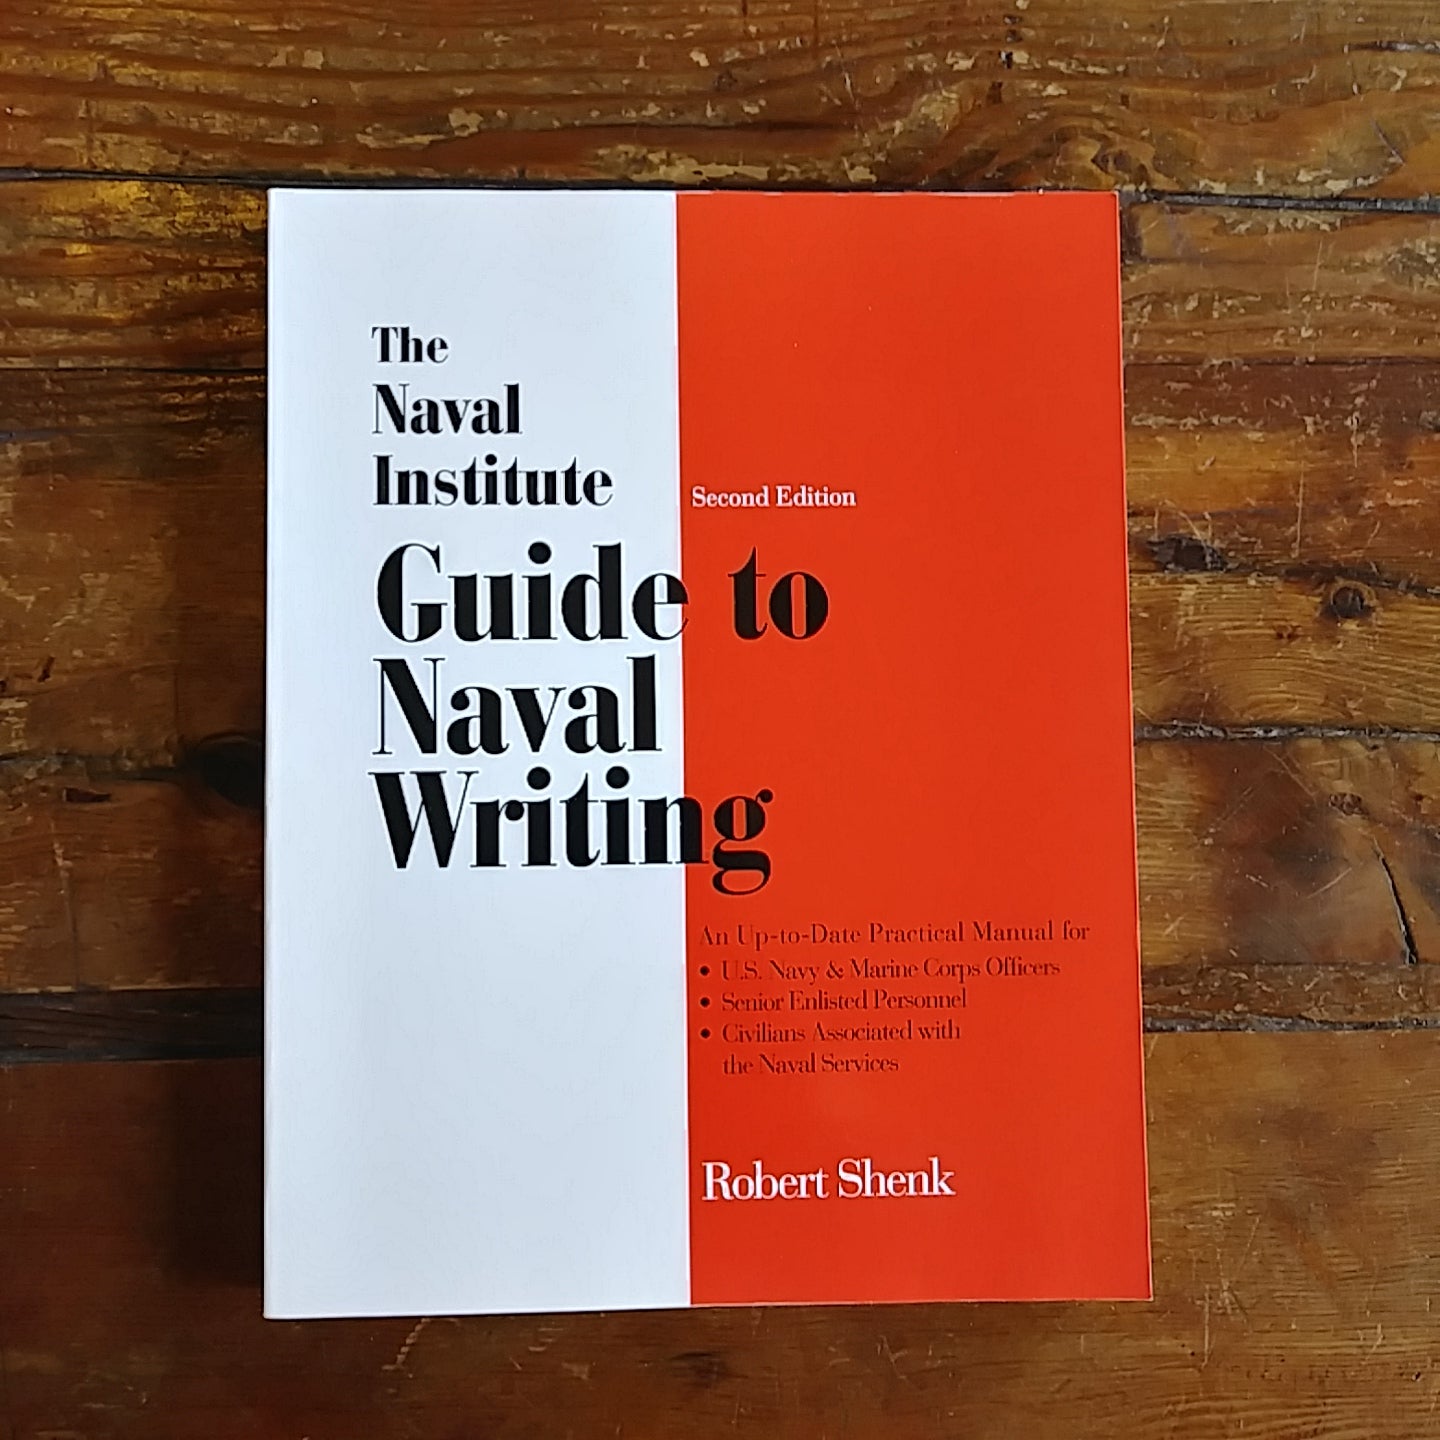 Book, "The Naval Institute Guide to Naval Writing"